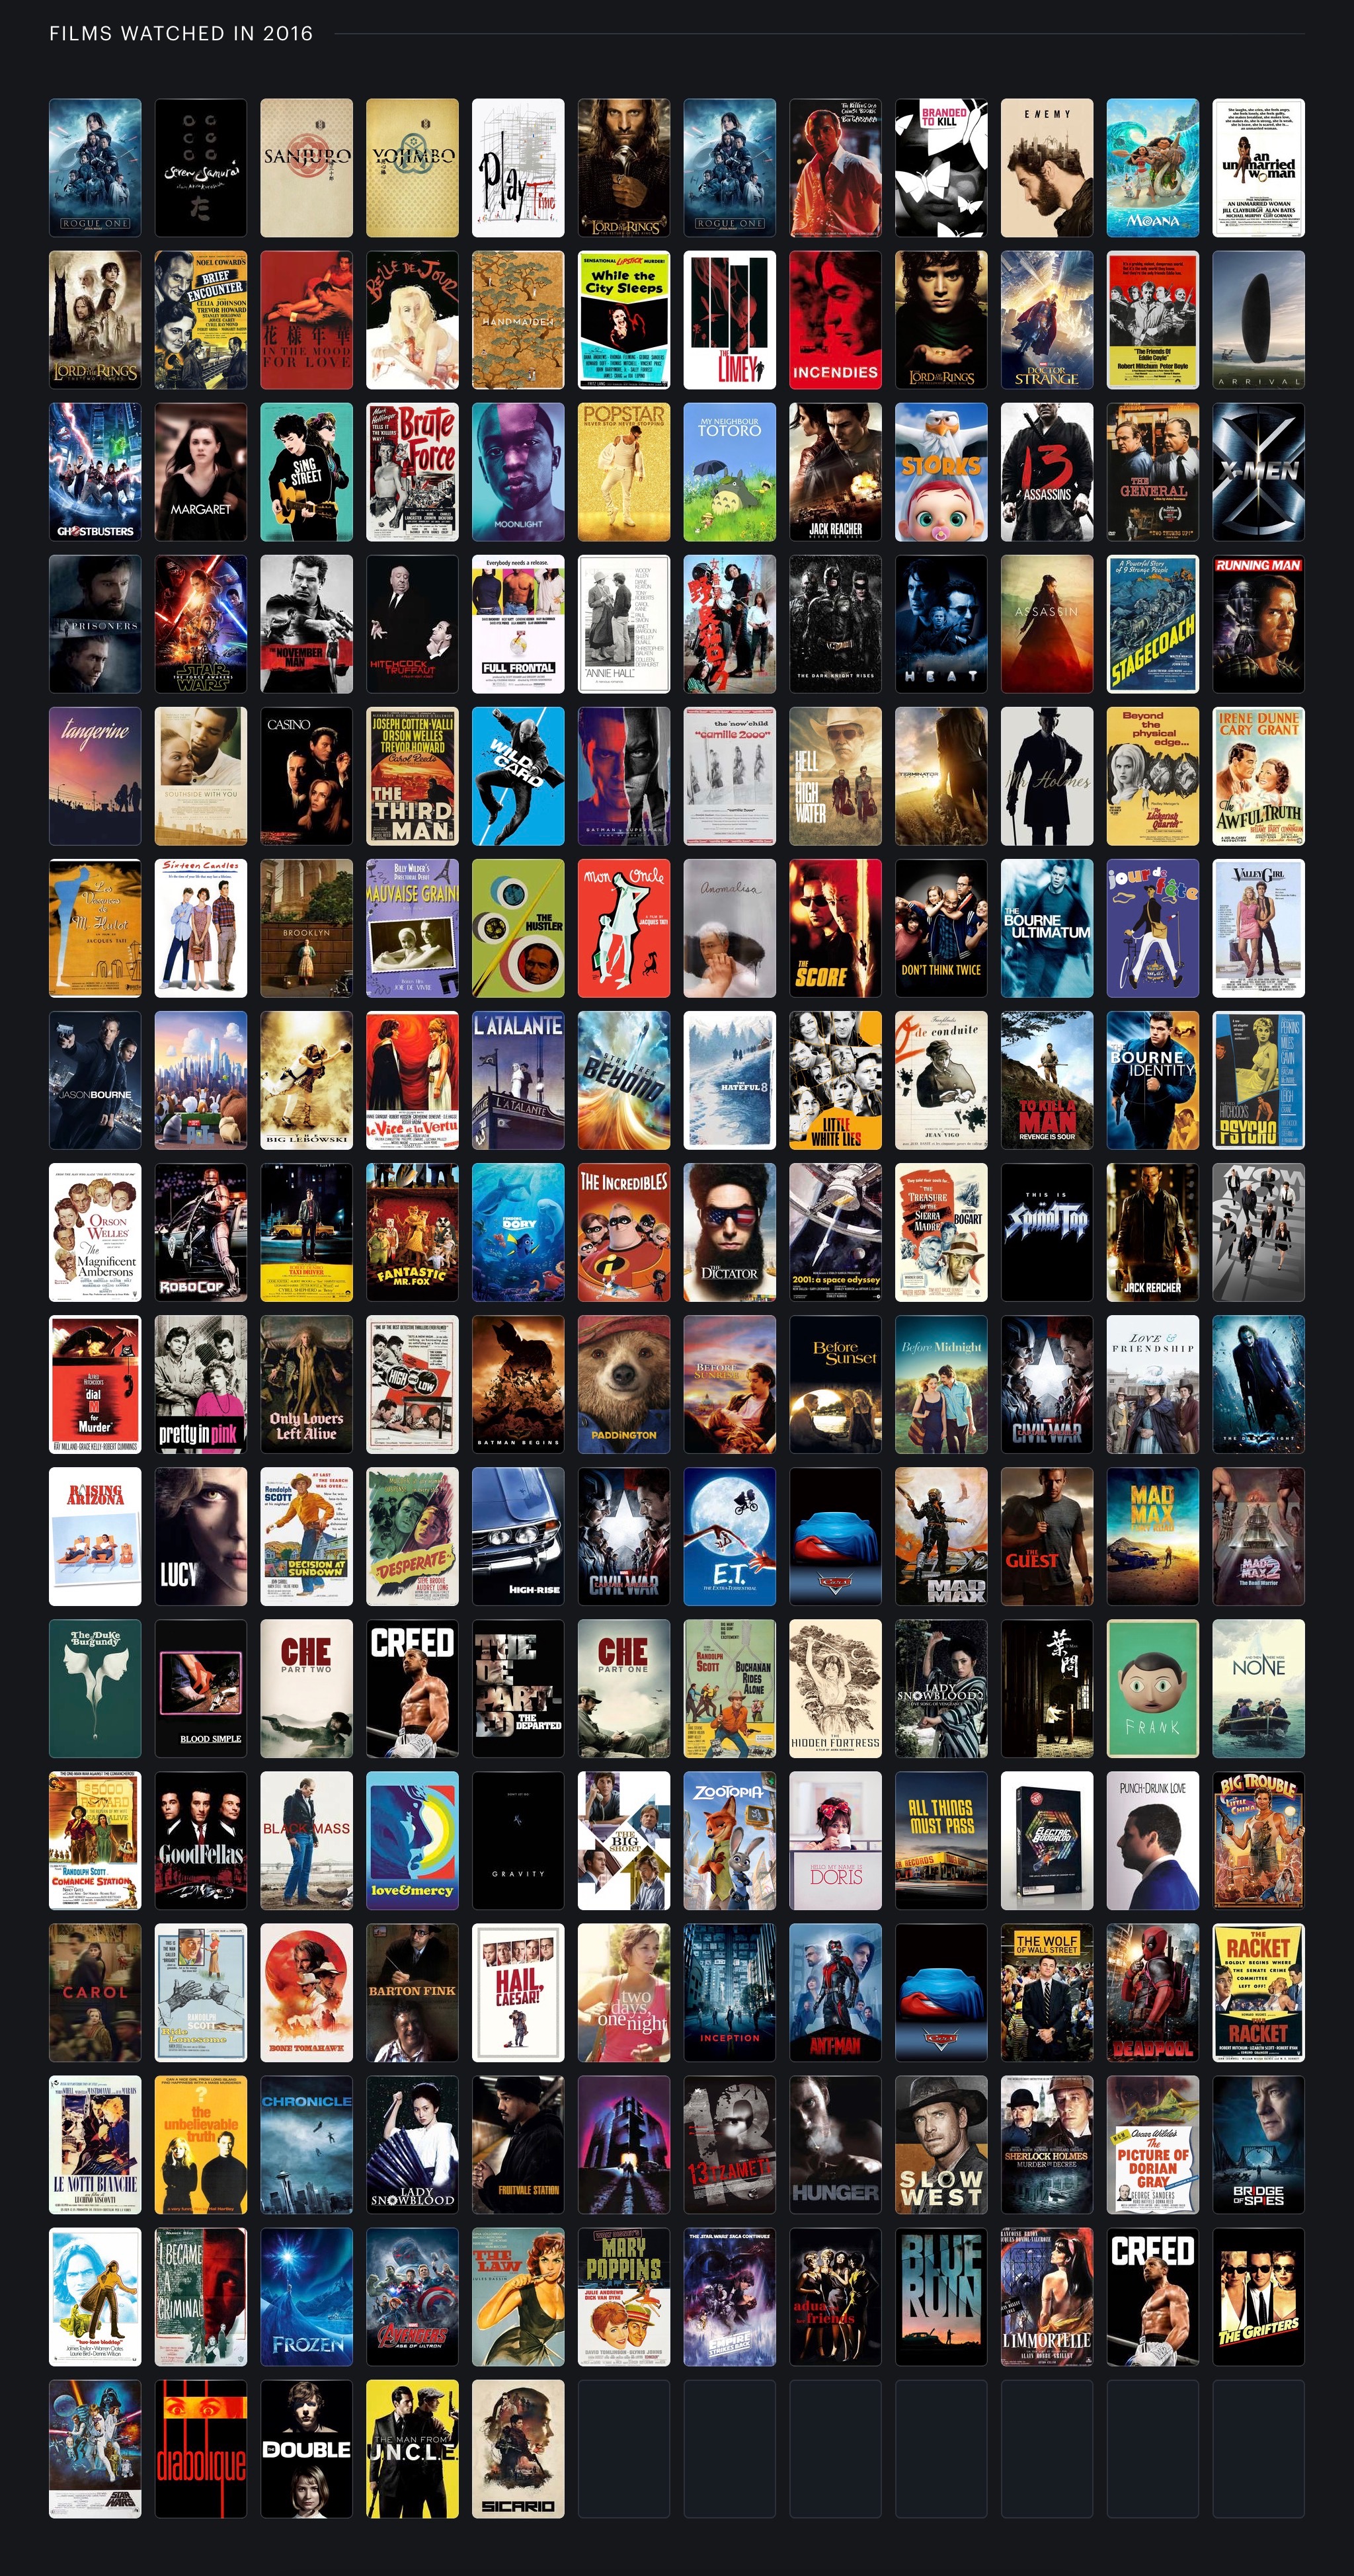 Movies I Watched in 2016, via Letterboxd